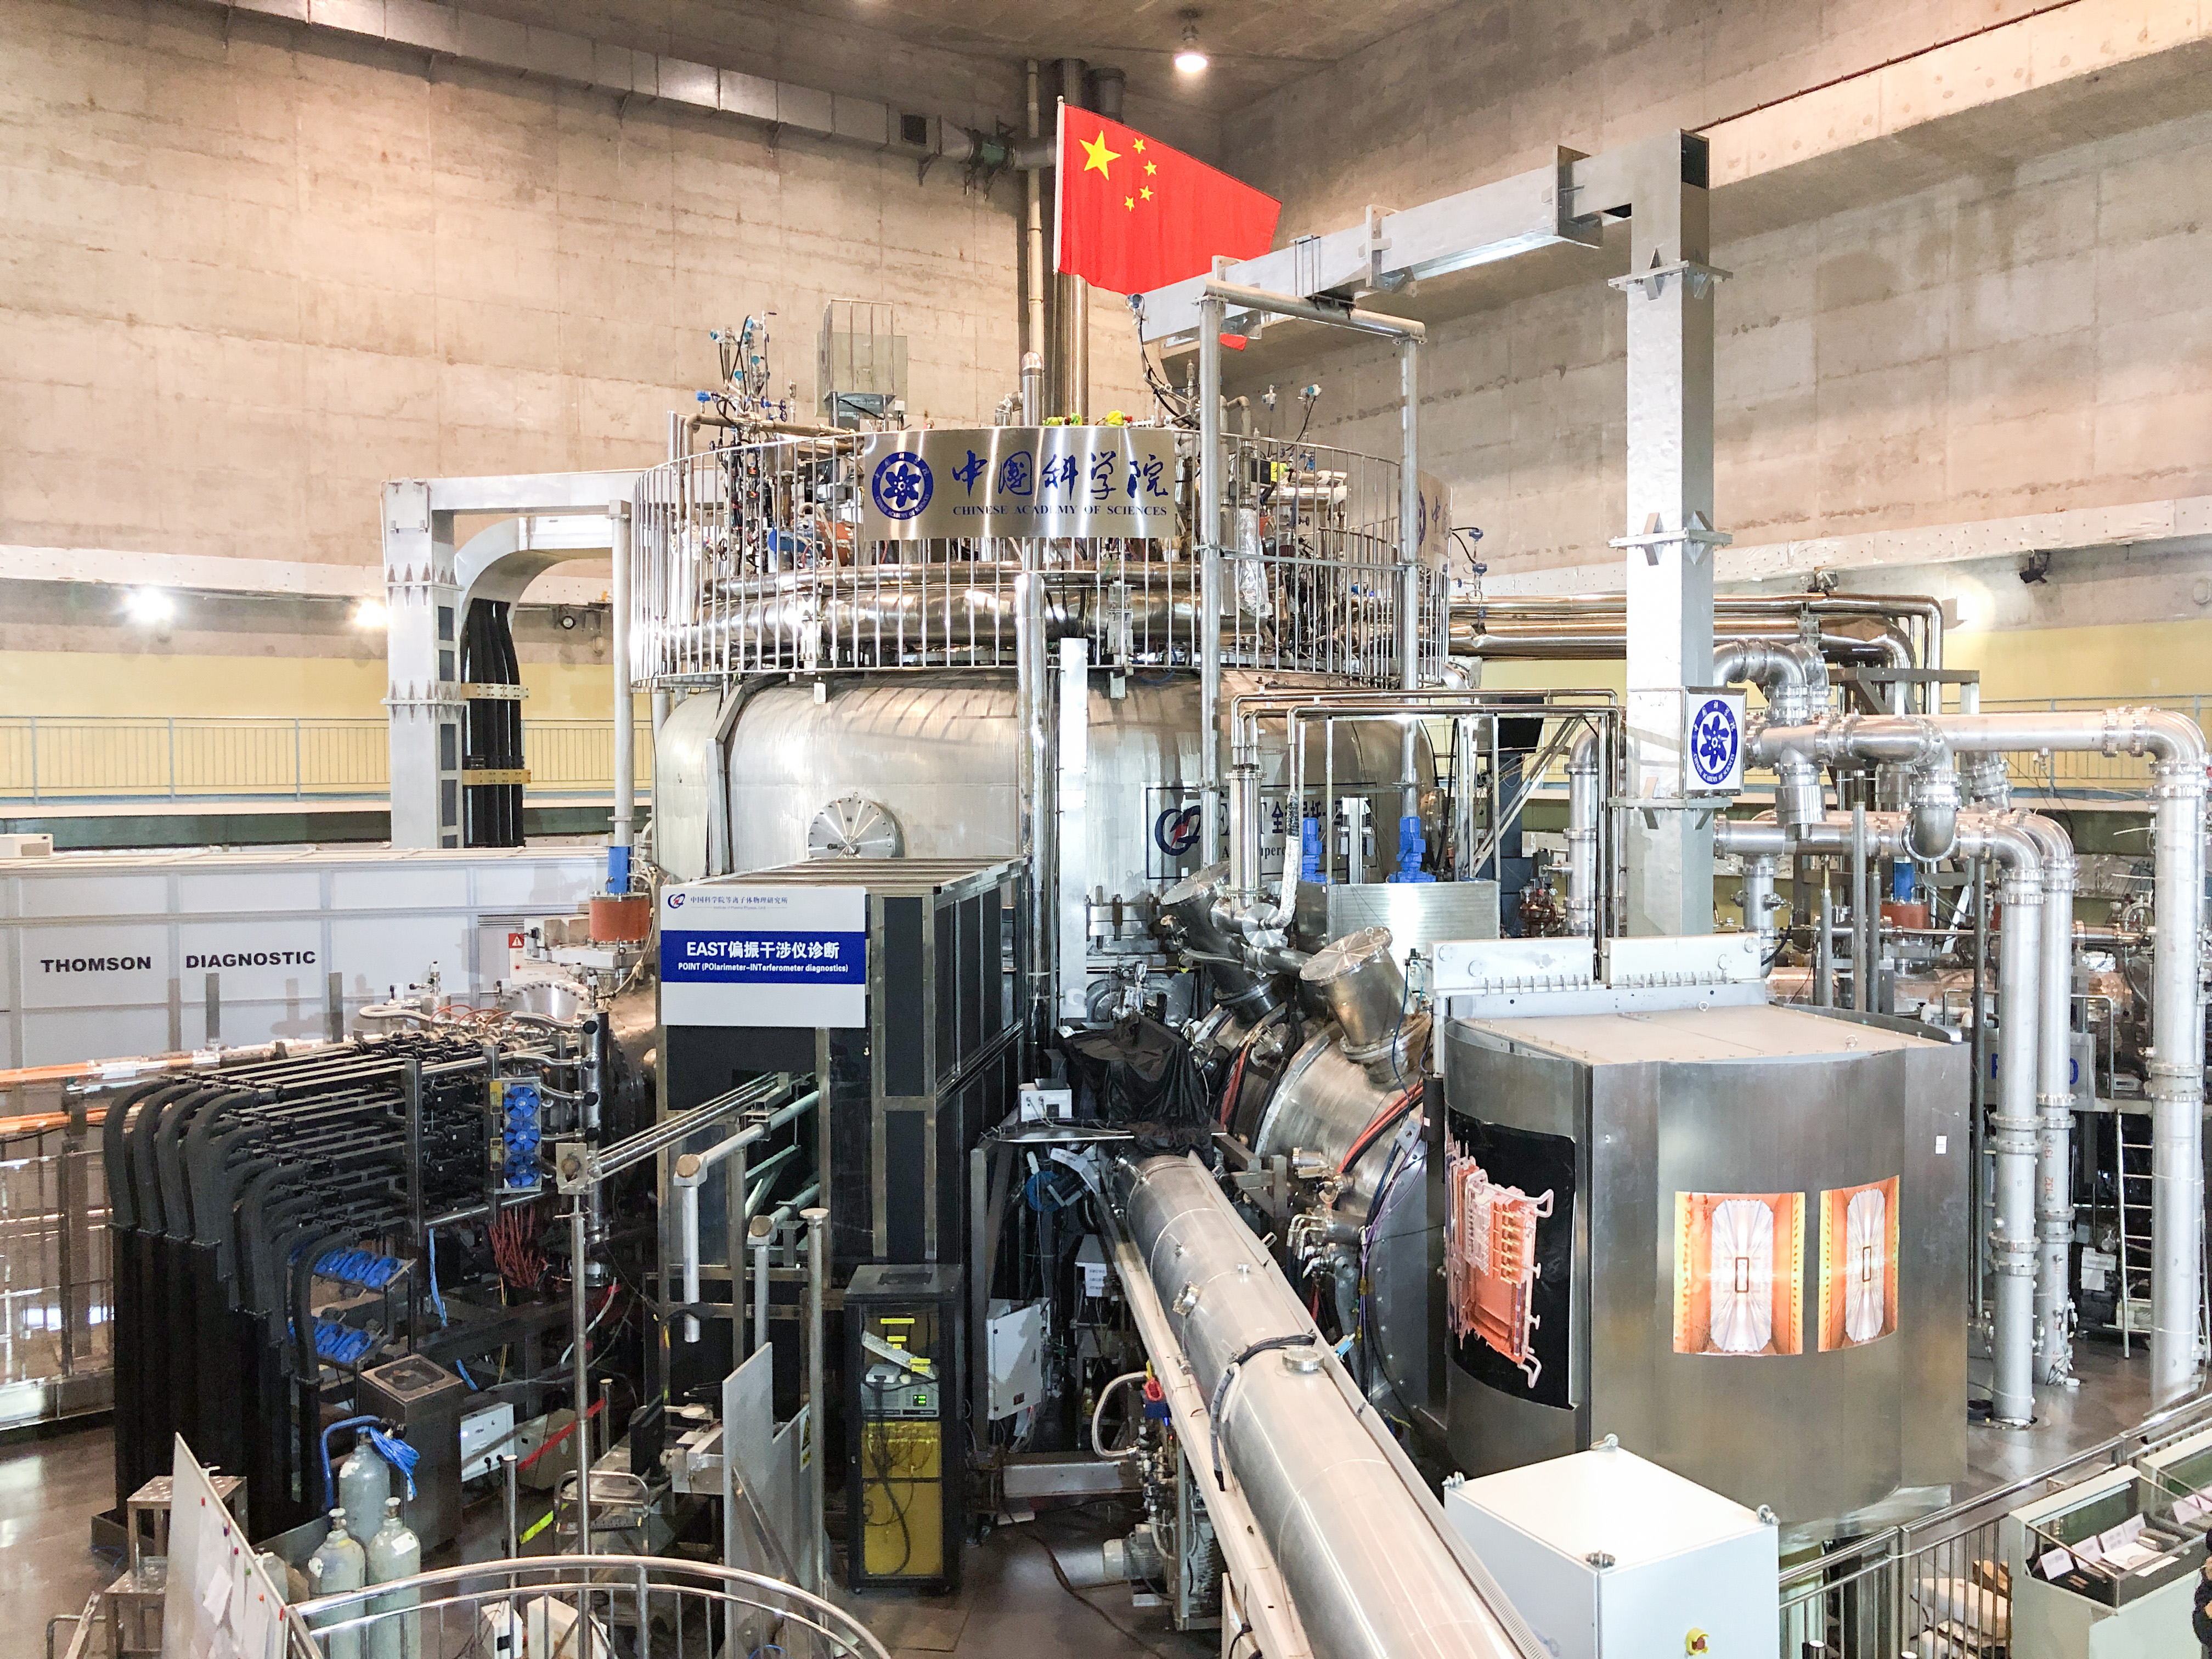 The Experimental Advanced Superconducting Tokamak (EAST), internal designation HT-7U, an experimental superconducting tokamak magnetic fusion energy reactor, in Hefei in central China's Anhui province Monday, April 15, 2019.